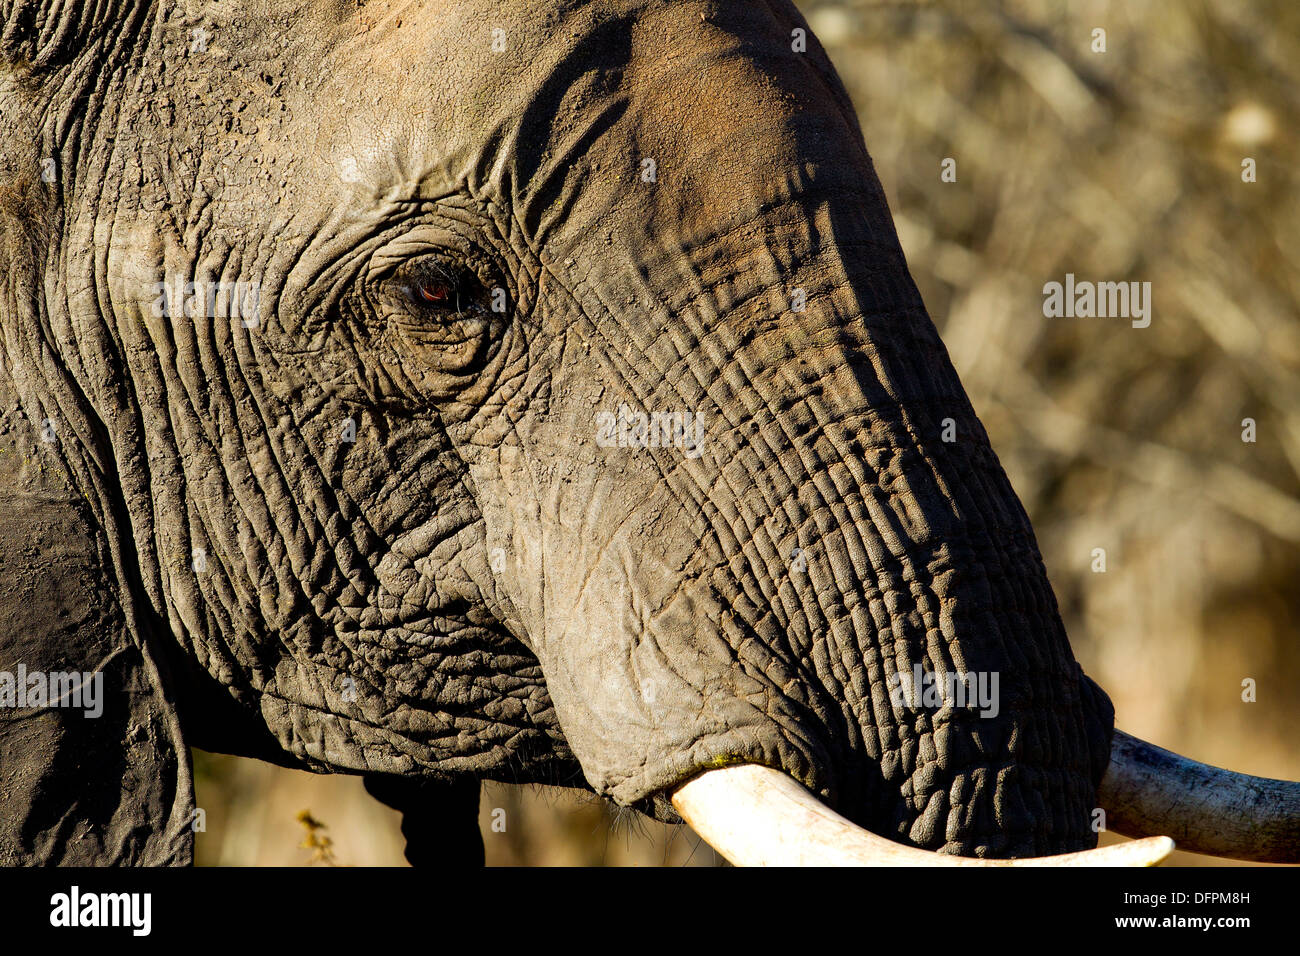 African elephant in close-up, Kruger Park, South Africa Stock Photo